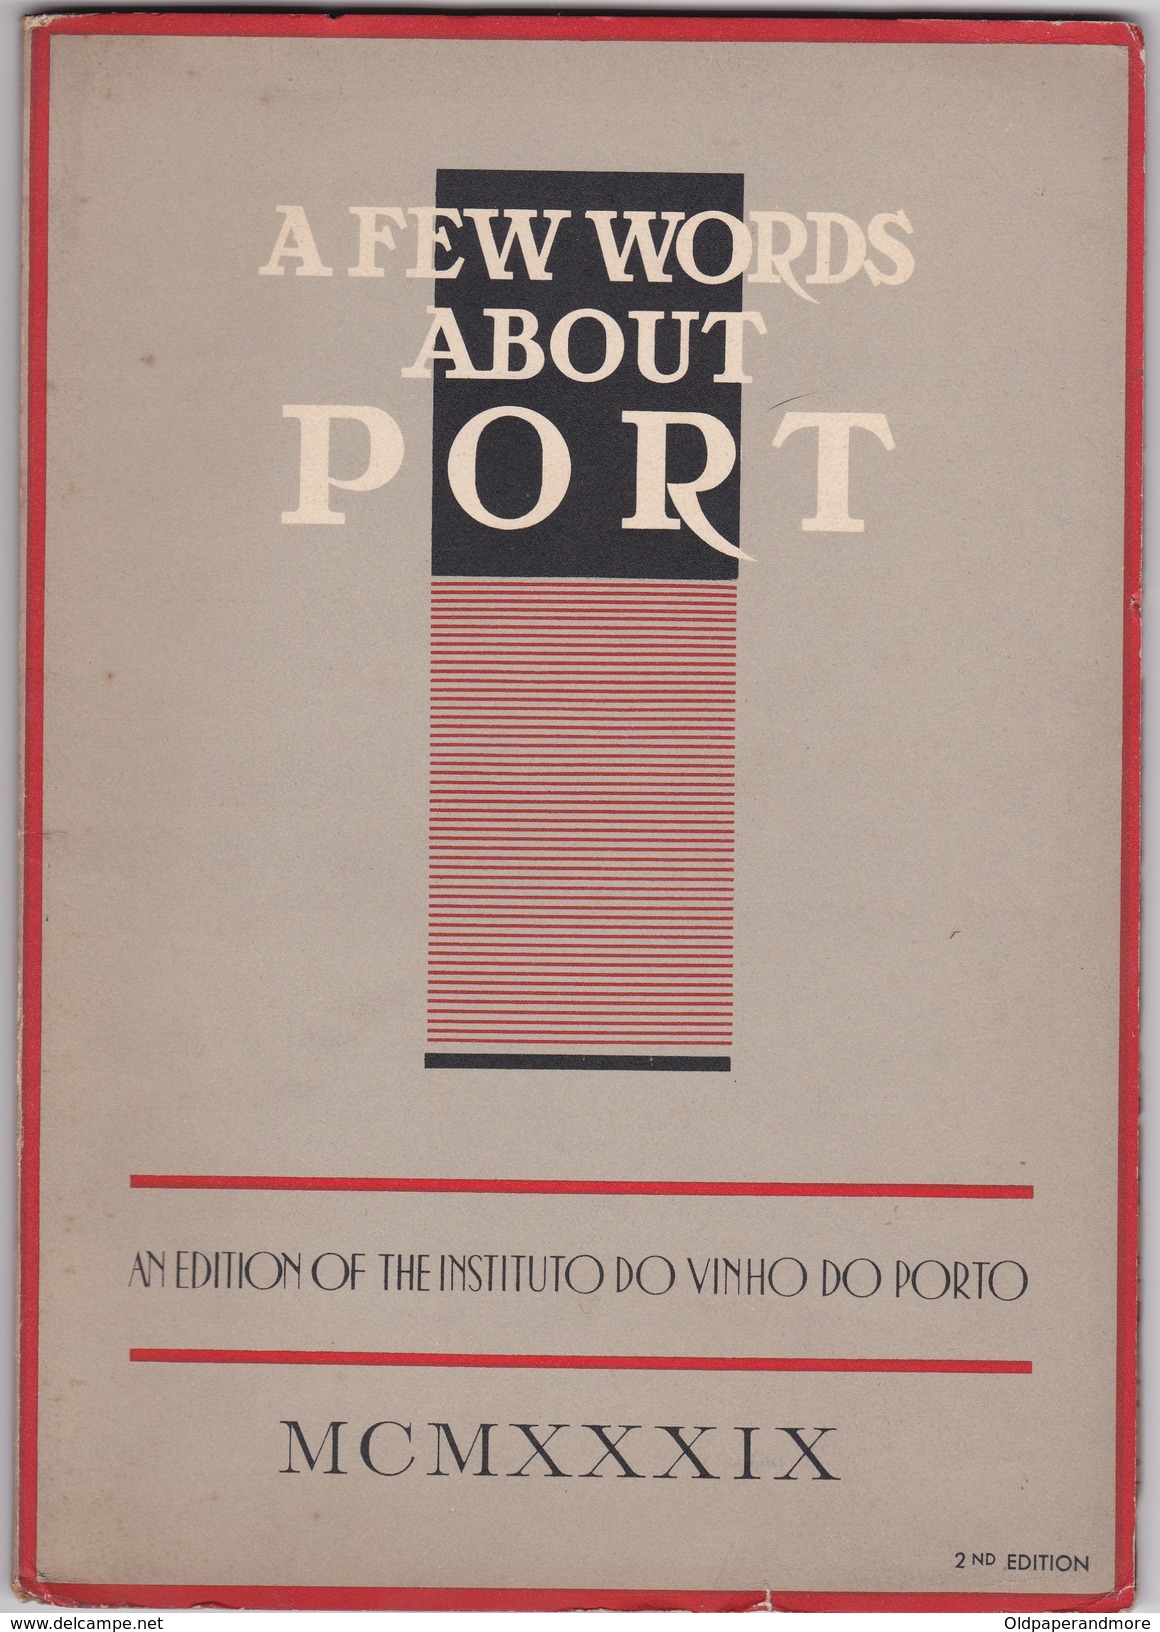 PORTUGAL - A FEW WORDS ABOUT PORT - AN EDITION OF THE INSTITUTO DO VINHO DO PORTO 1939 - WINE - VINO - 2nd EDITION - Européenne